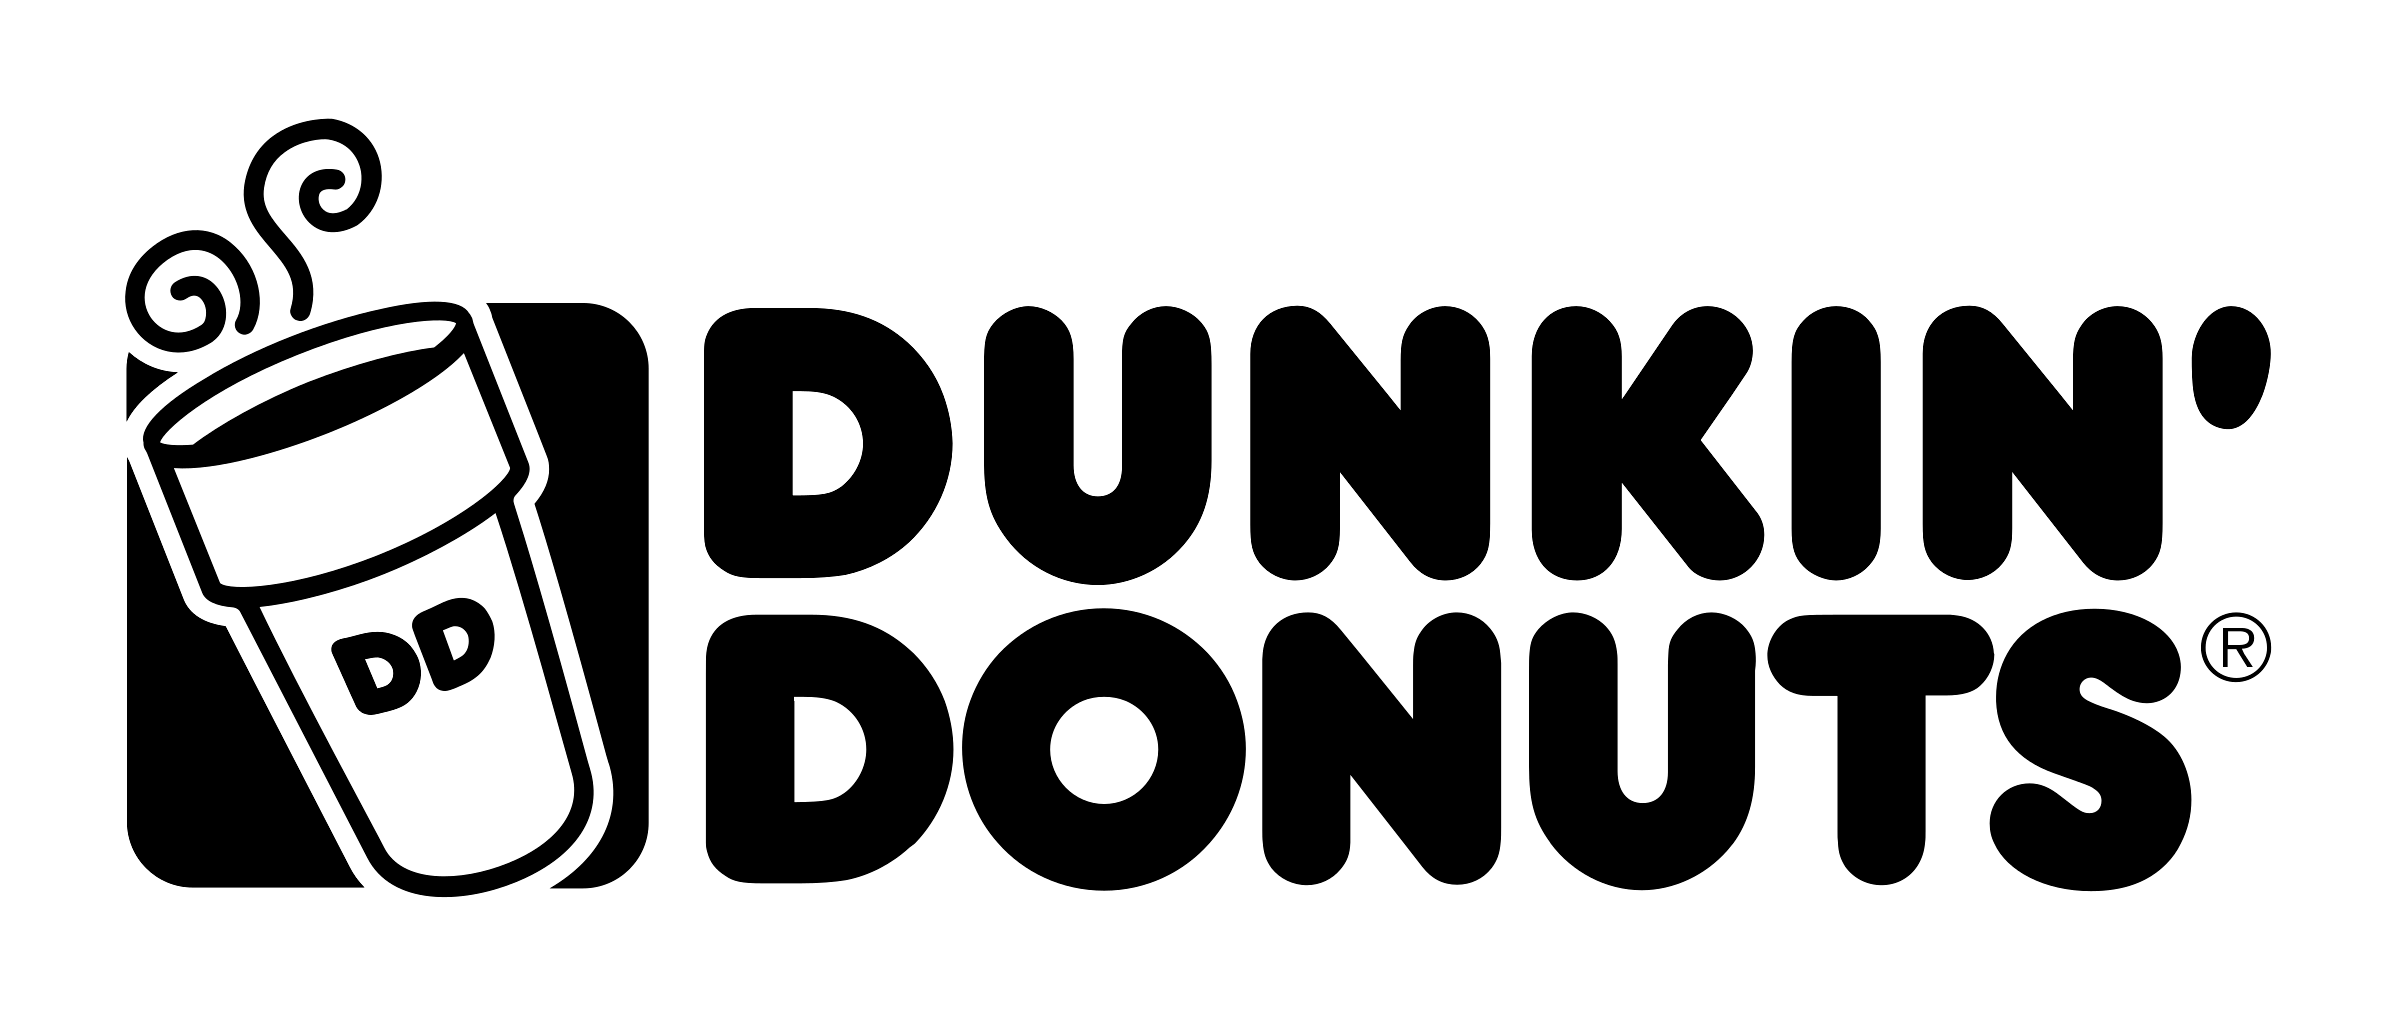 dunkin-donuts-logo-black-and-white.png